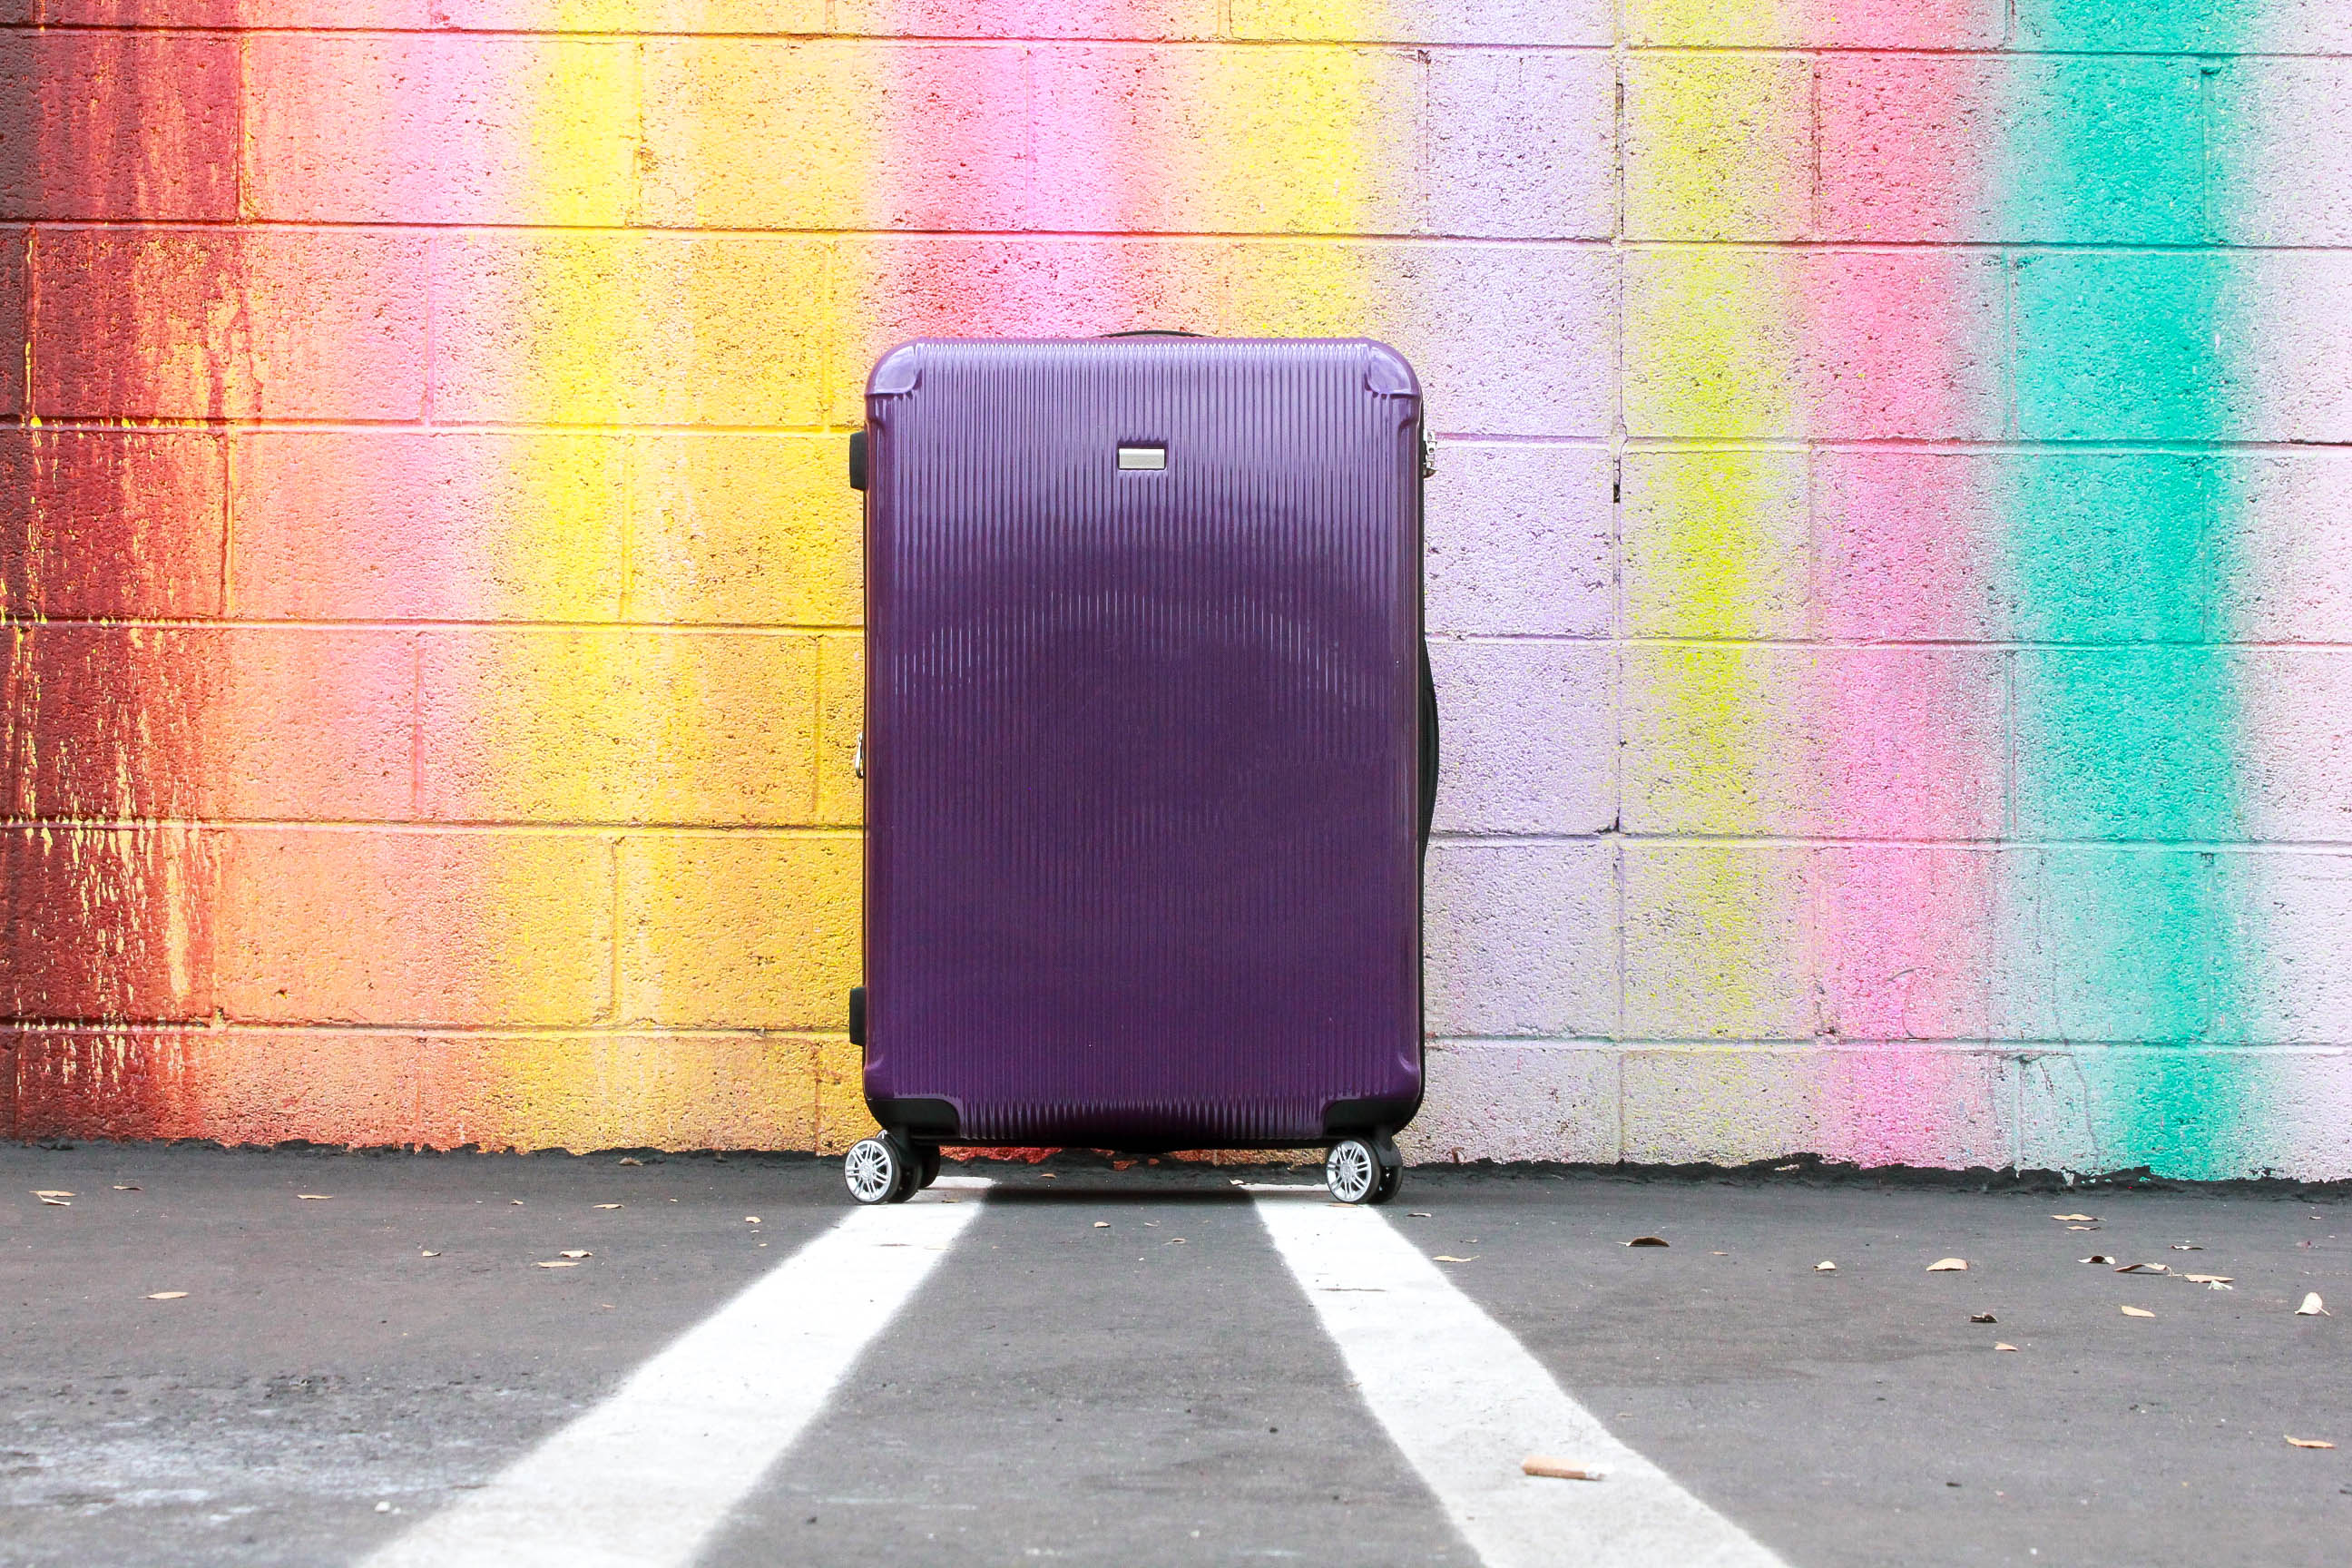 missyonmadison, missyonmadison instagram, fashion blog, fashion blogger, style blog, style blogger, melissa tierney, missyonmadiosn instagram, missyonmadison blog, travel blog, travel blogger, luggage reviews, gabbiano luggae, gabbiano luggage review, pasadena colored wall, la wall crawl, la colorful walls, colorful walls in la, blogger, la blogger, travel goals, packing tips, travel style, what to wear when traveling, purple luggage, gabbiano luggage, bloglovin, travel guide, travel buys,